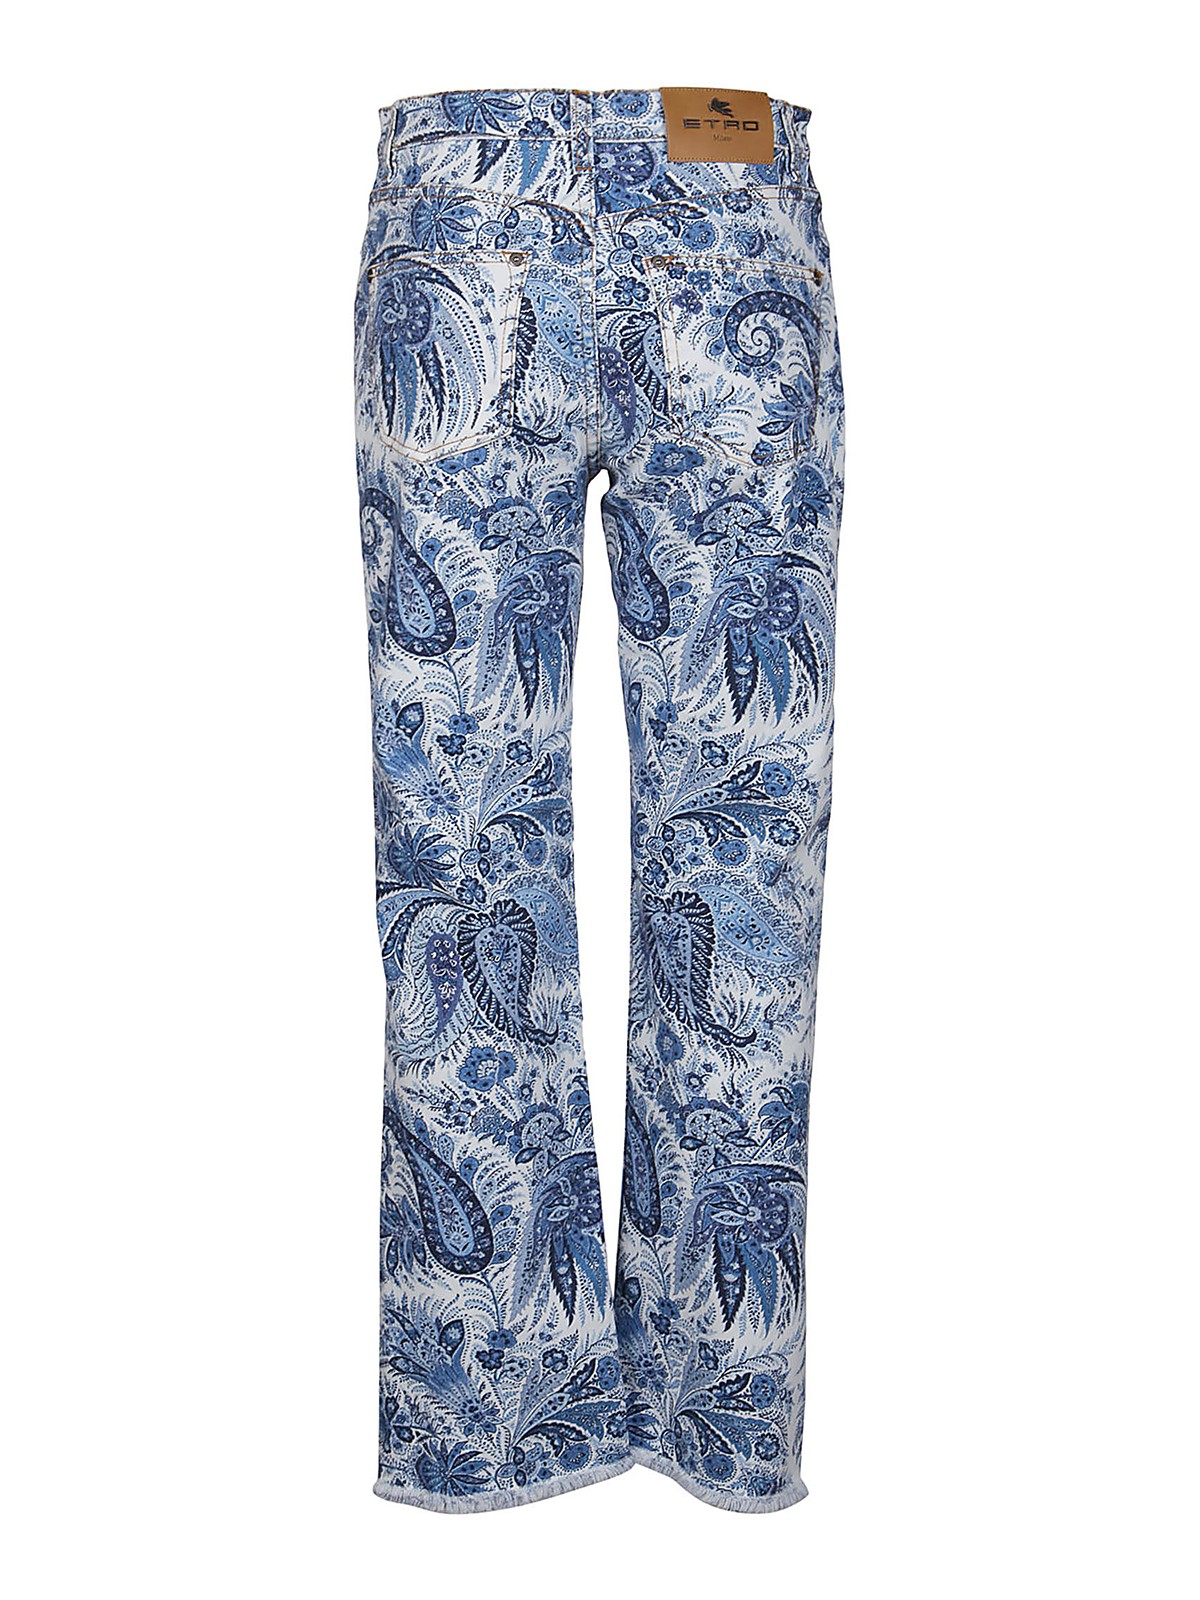 Etro - Ibiza jeans - flared jeans - 1445194560200 | Shop online at iKRIX